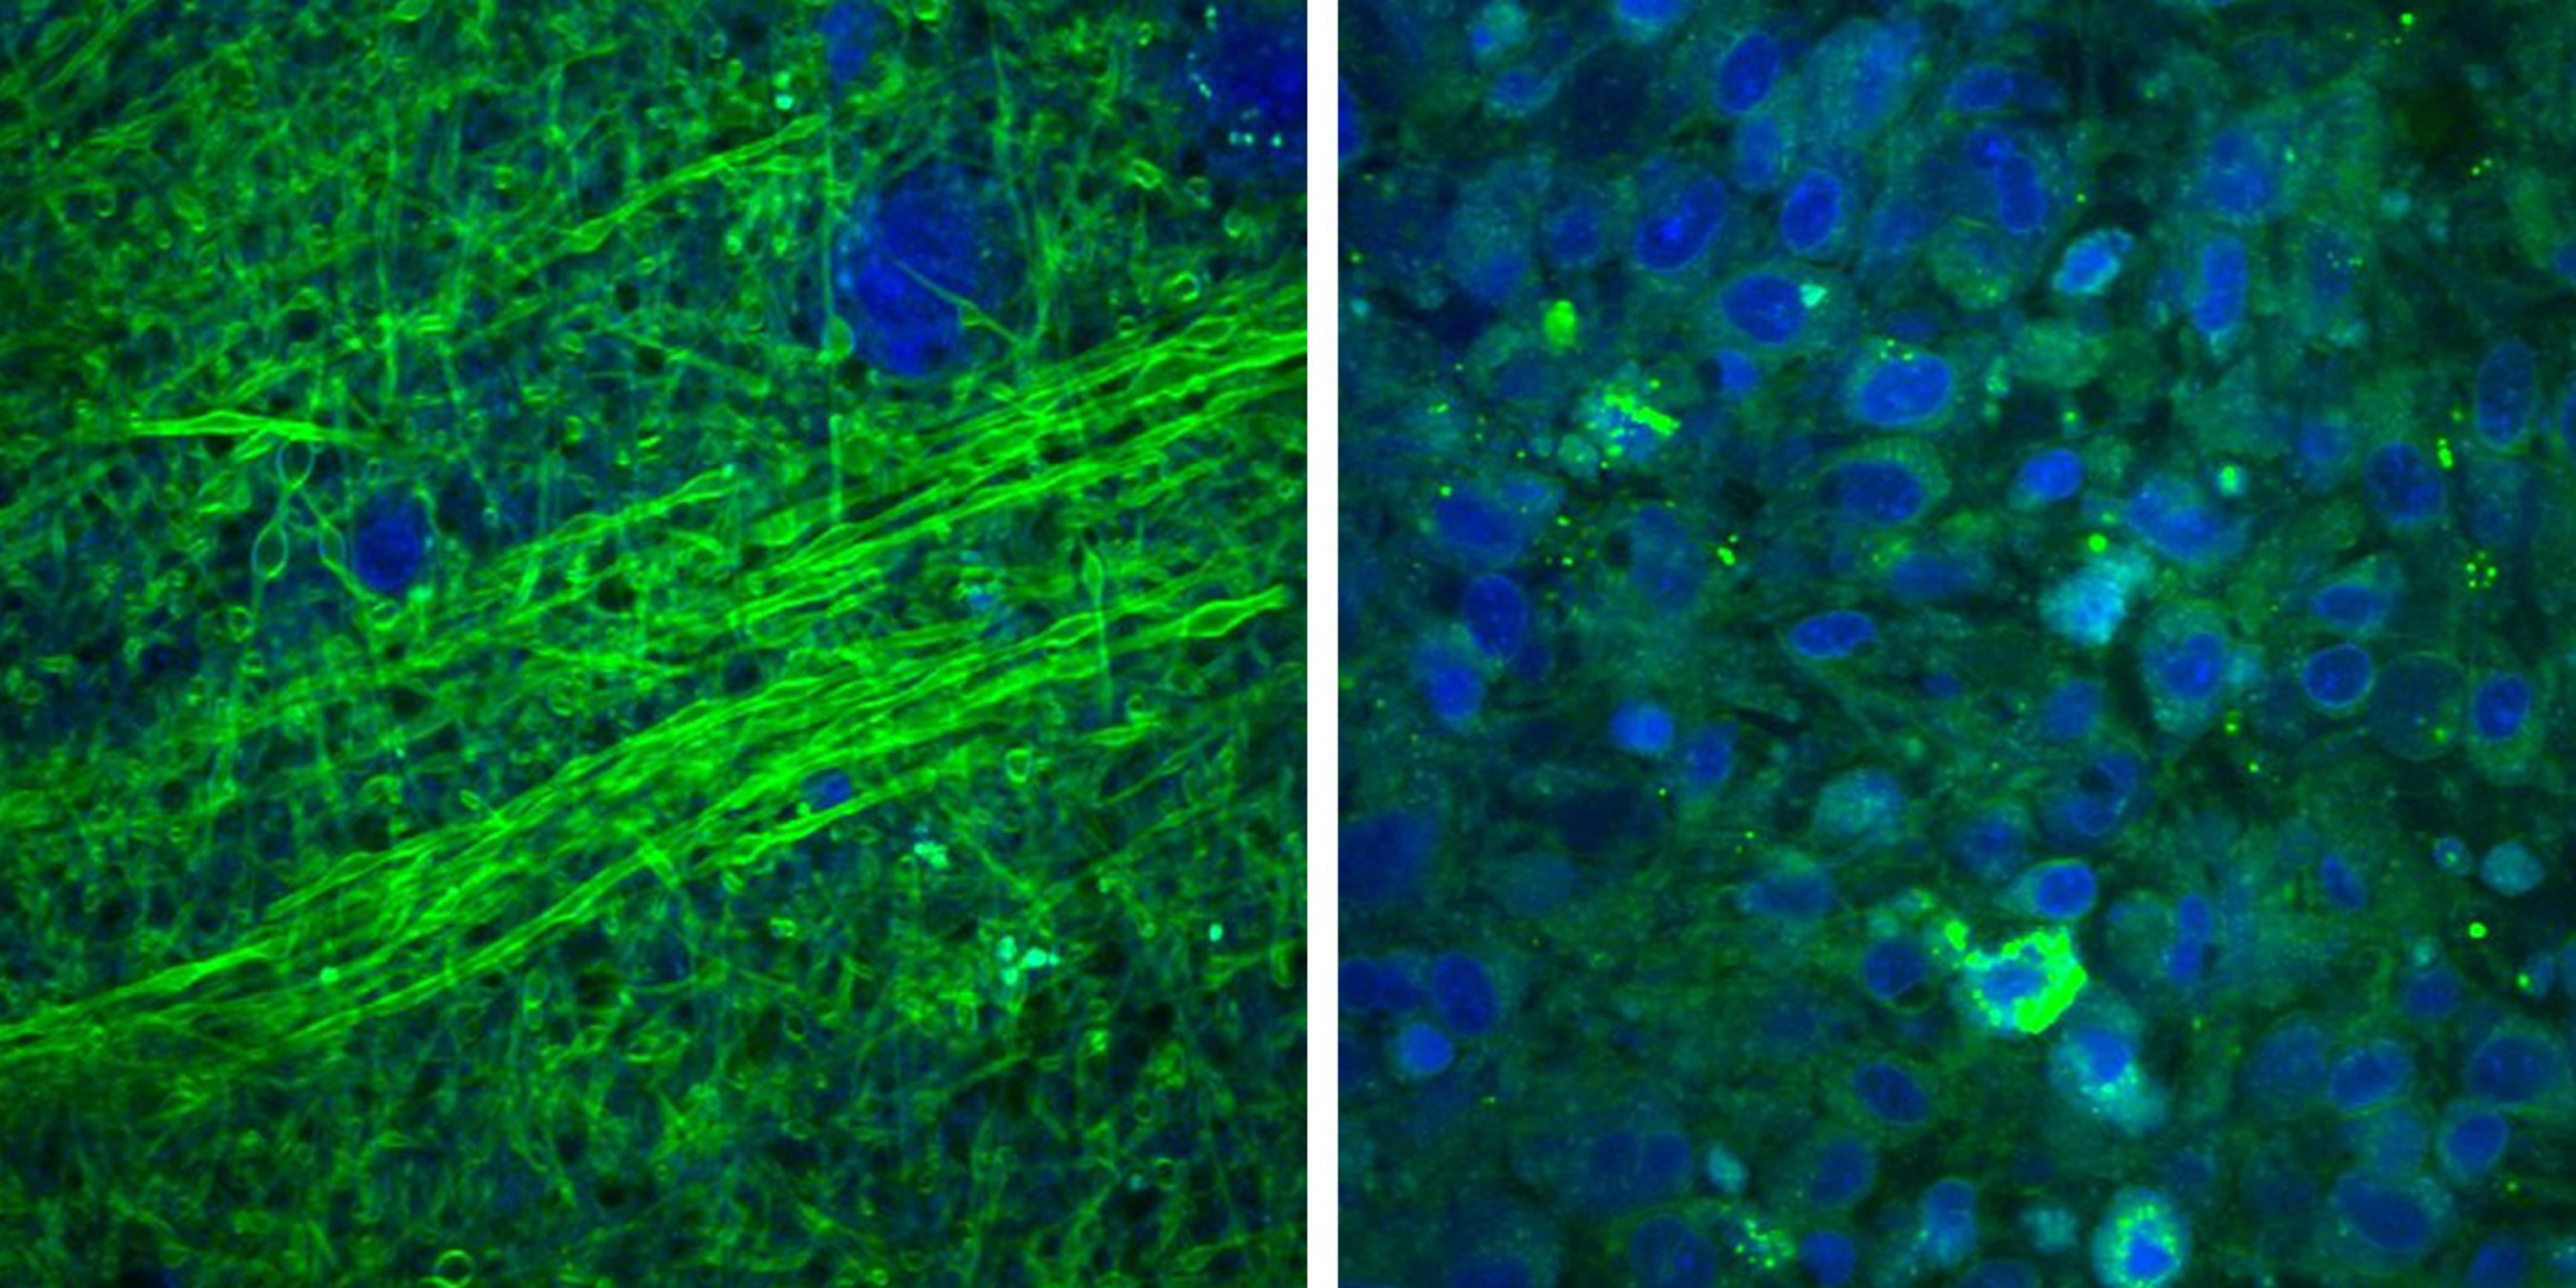 Images collected using an SRS microscope show that normal brain contains sparse cells with bundles of nerve fibers, called axons (left), but brain tumor tissue is full of cells in a disordered pattern (right). While you can see the difference on a microscopic scale, during surgery they'd be difficult to differentiate, making it hard for a surgeon to know where the tumor stops.